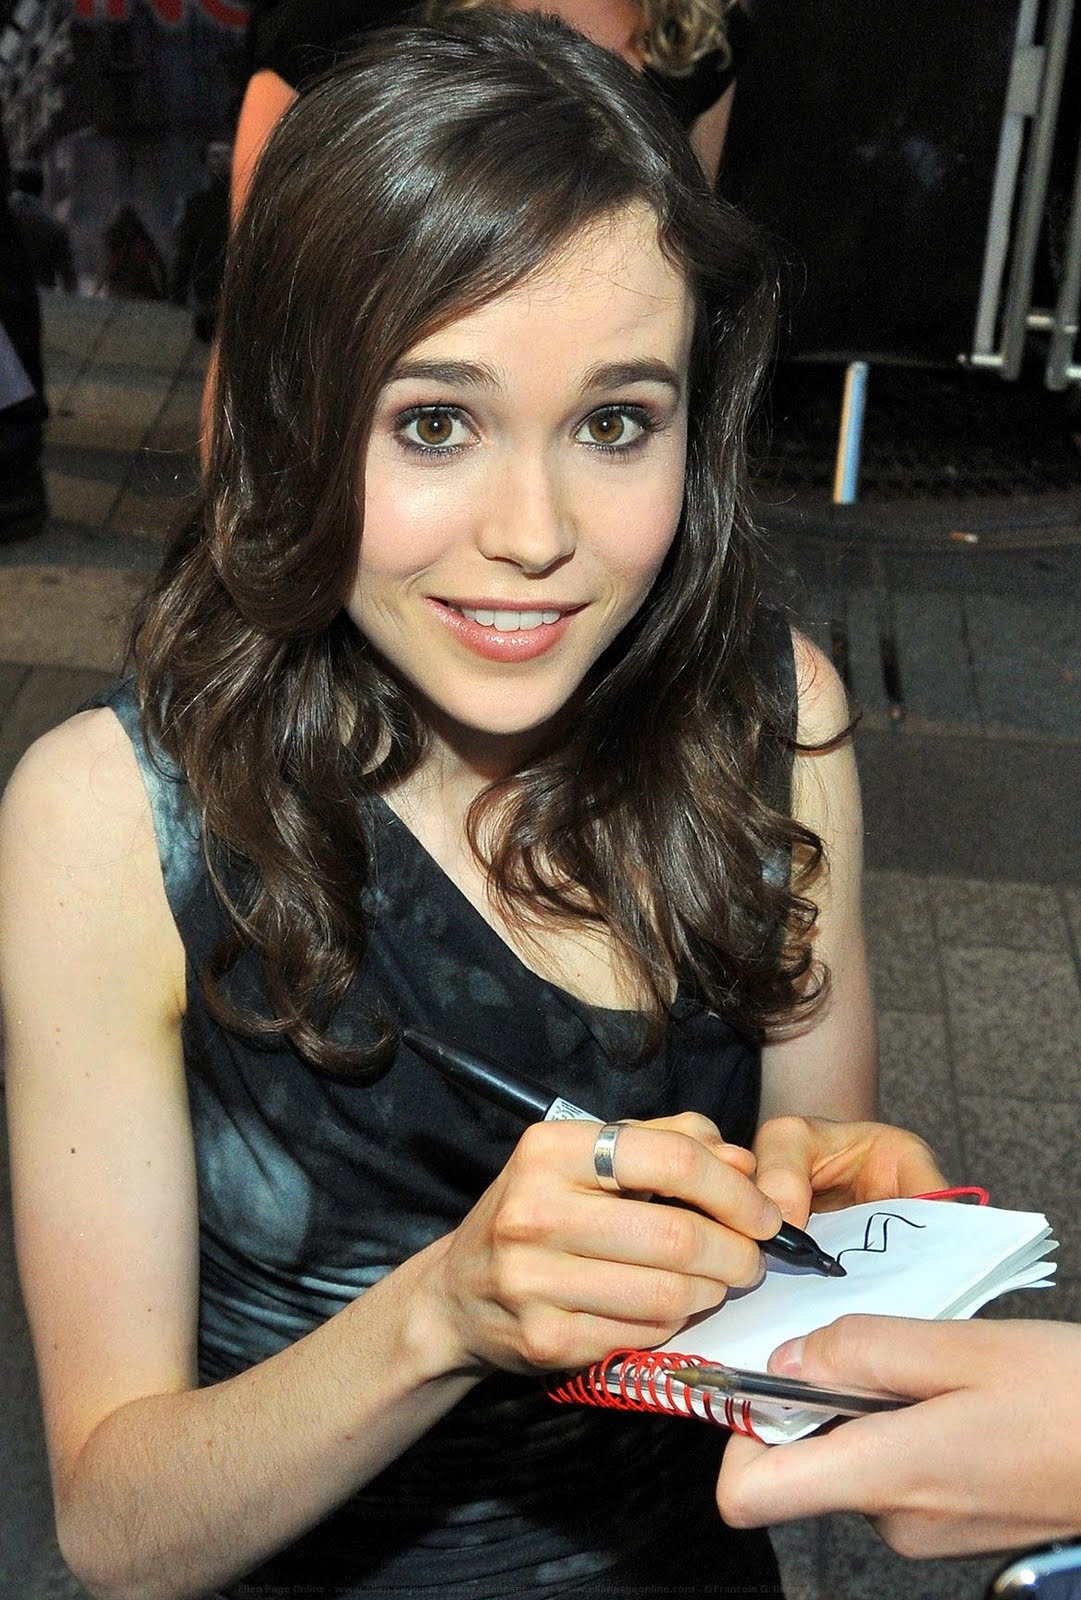 Ellen Page Profile And Pictures 2011 | All About Hollywood